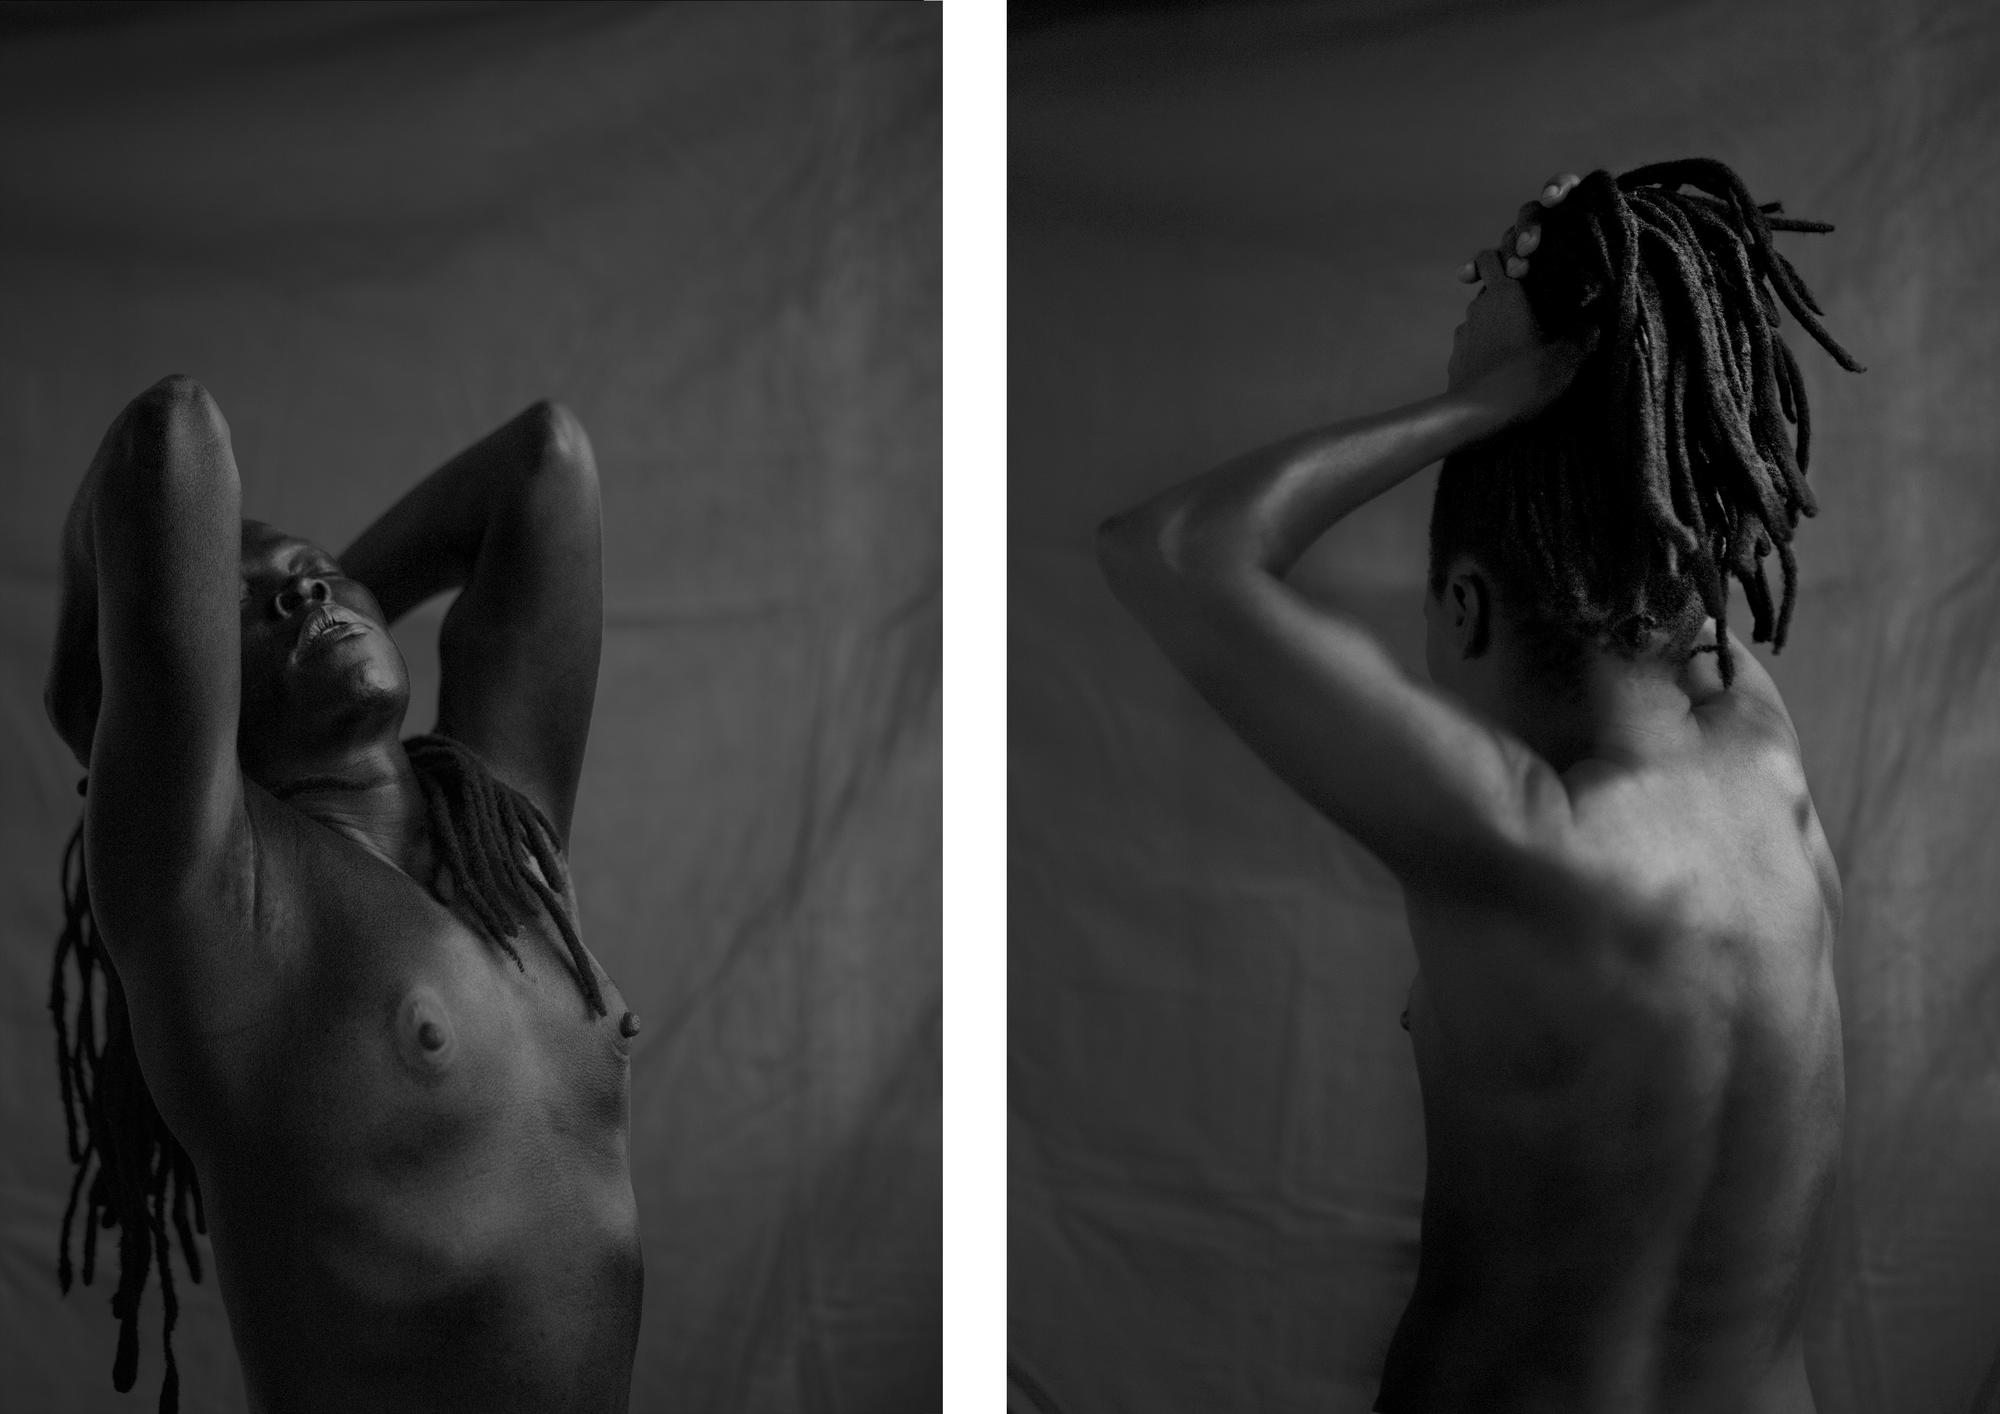 Two black and white photos, one topless and one with the persons back facing me.